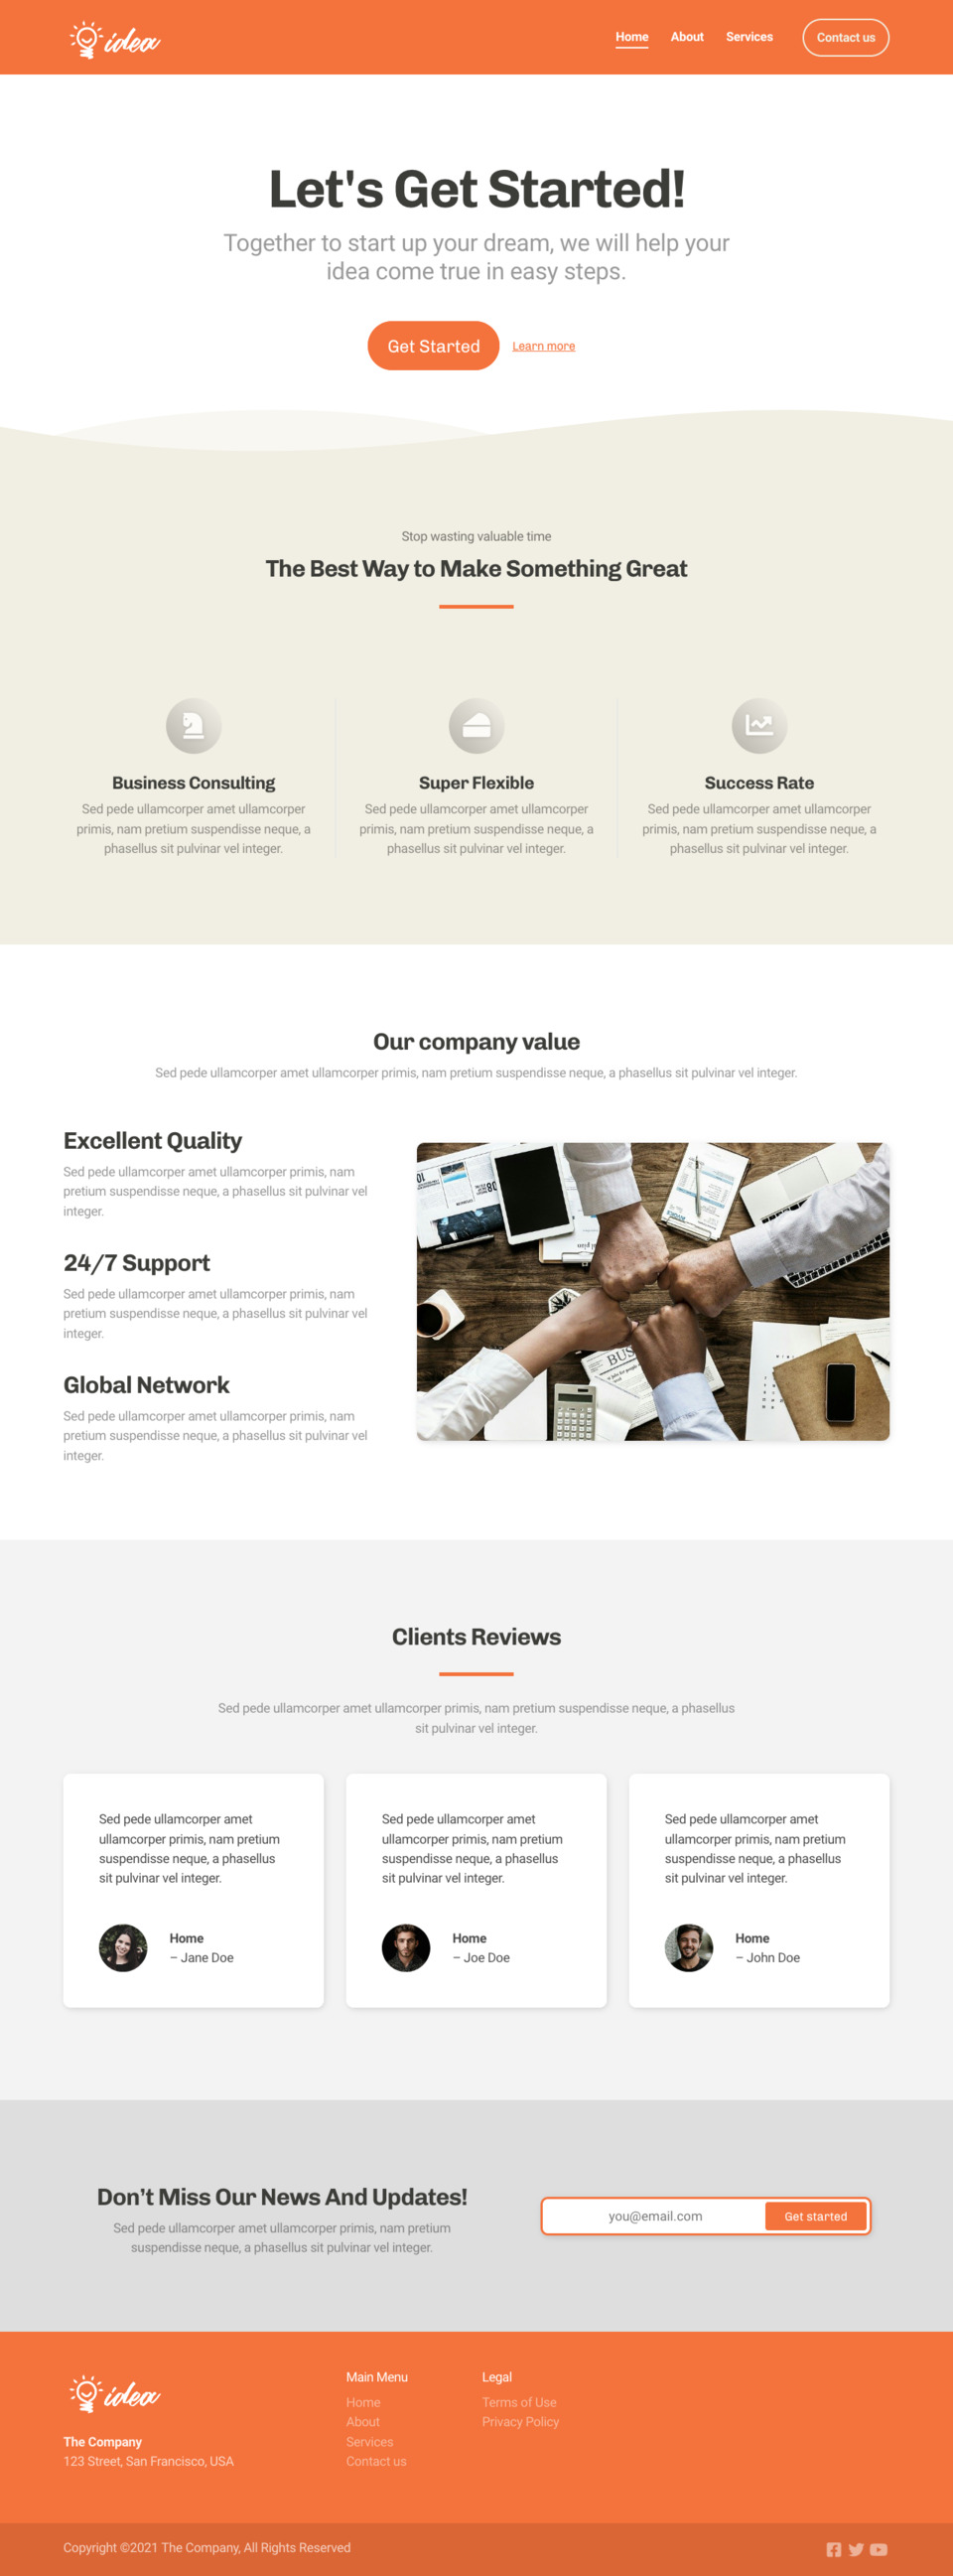 Idea Website Template - Ideal for small businesses, startups, entrepreneurs, tech enthusiasts, and anyone looking to launch a professional website quickly and easily.